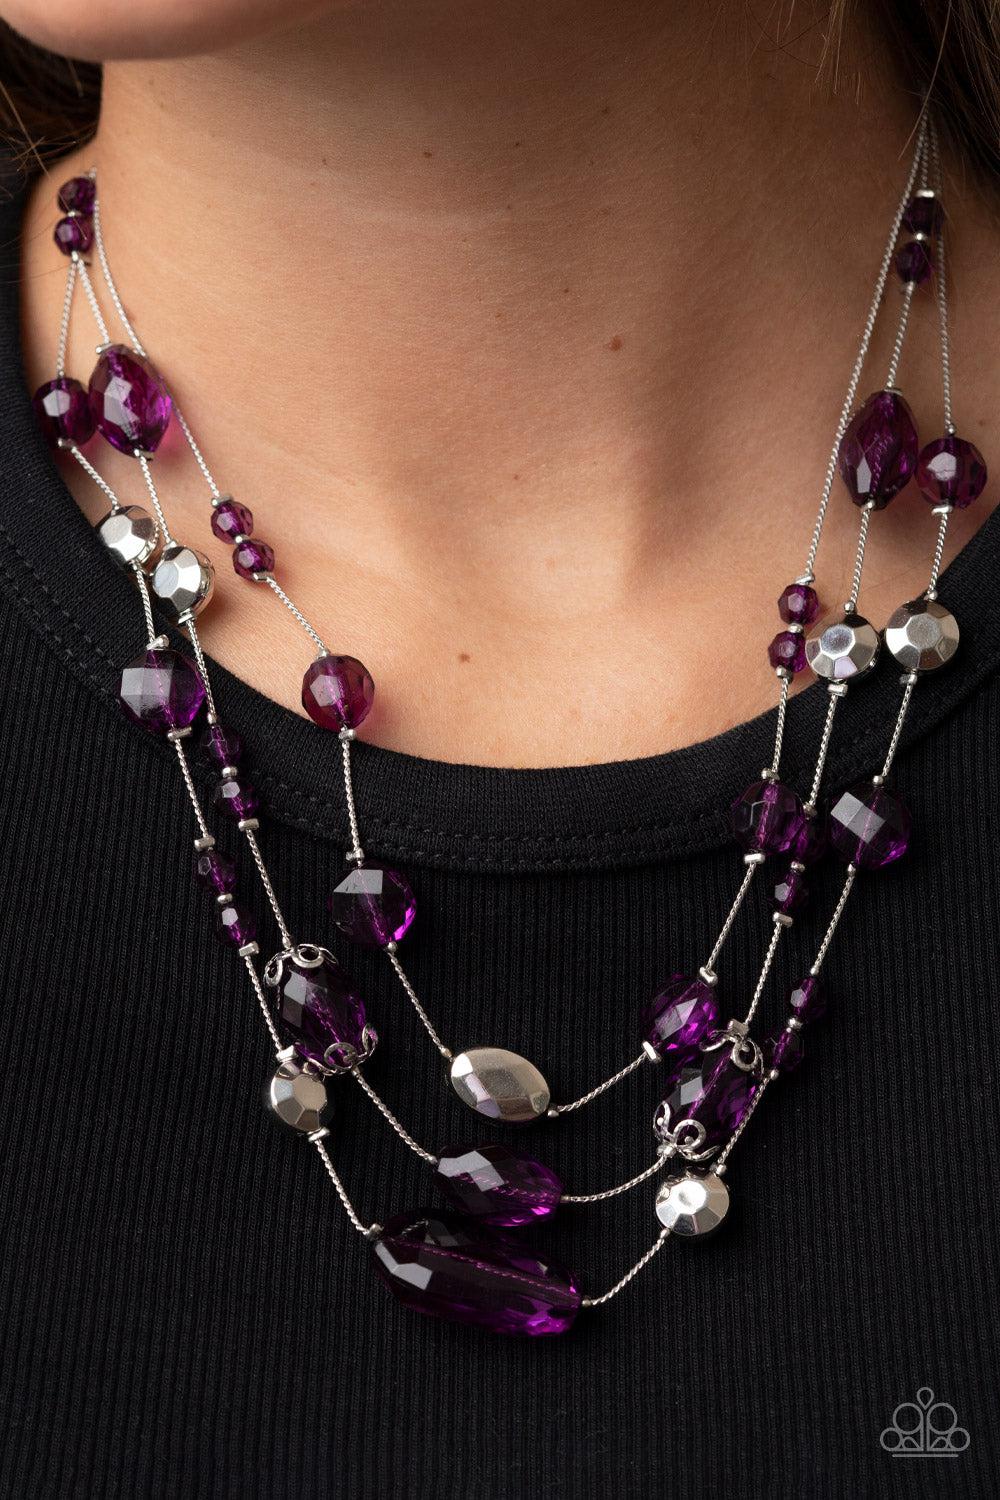 Prismatic Pose Purple Necklace - Paparazzi Accessories-on model - CarasShop.com - $5 Jewelry by Cara Jewels